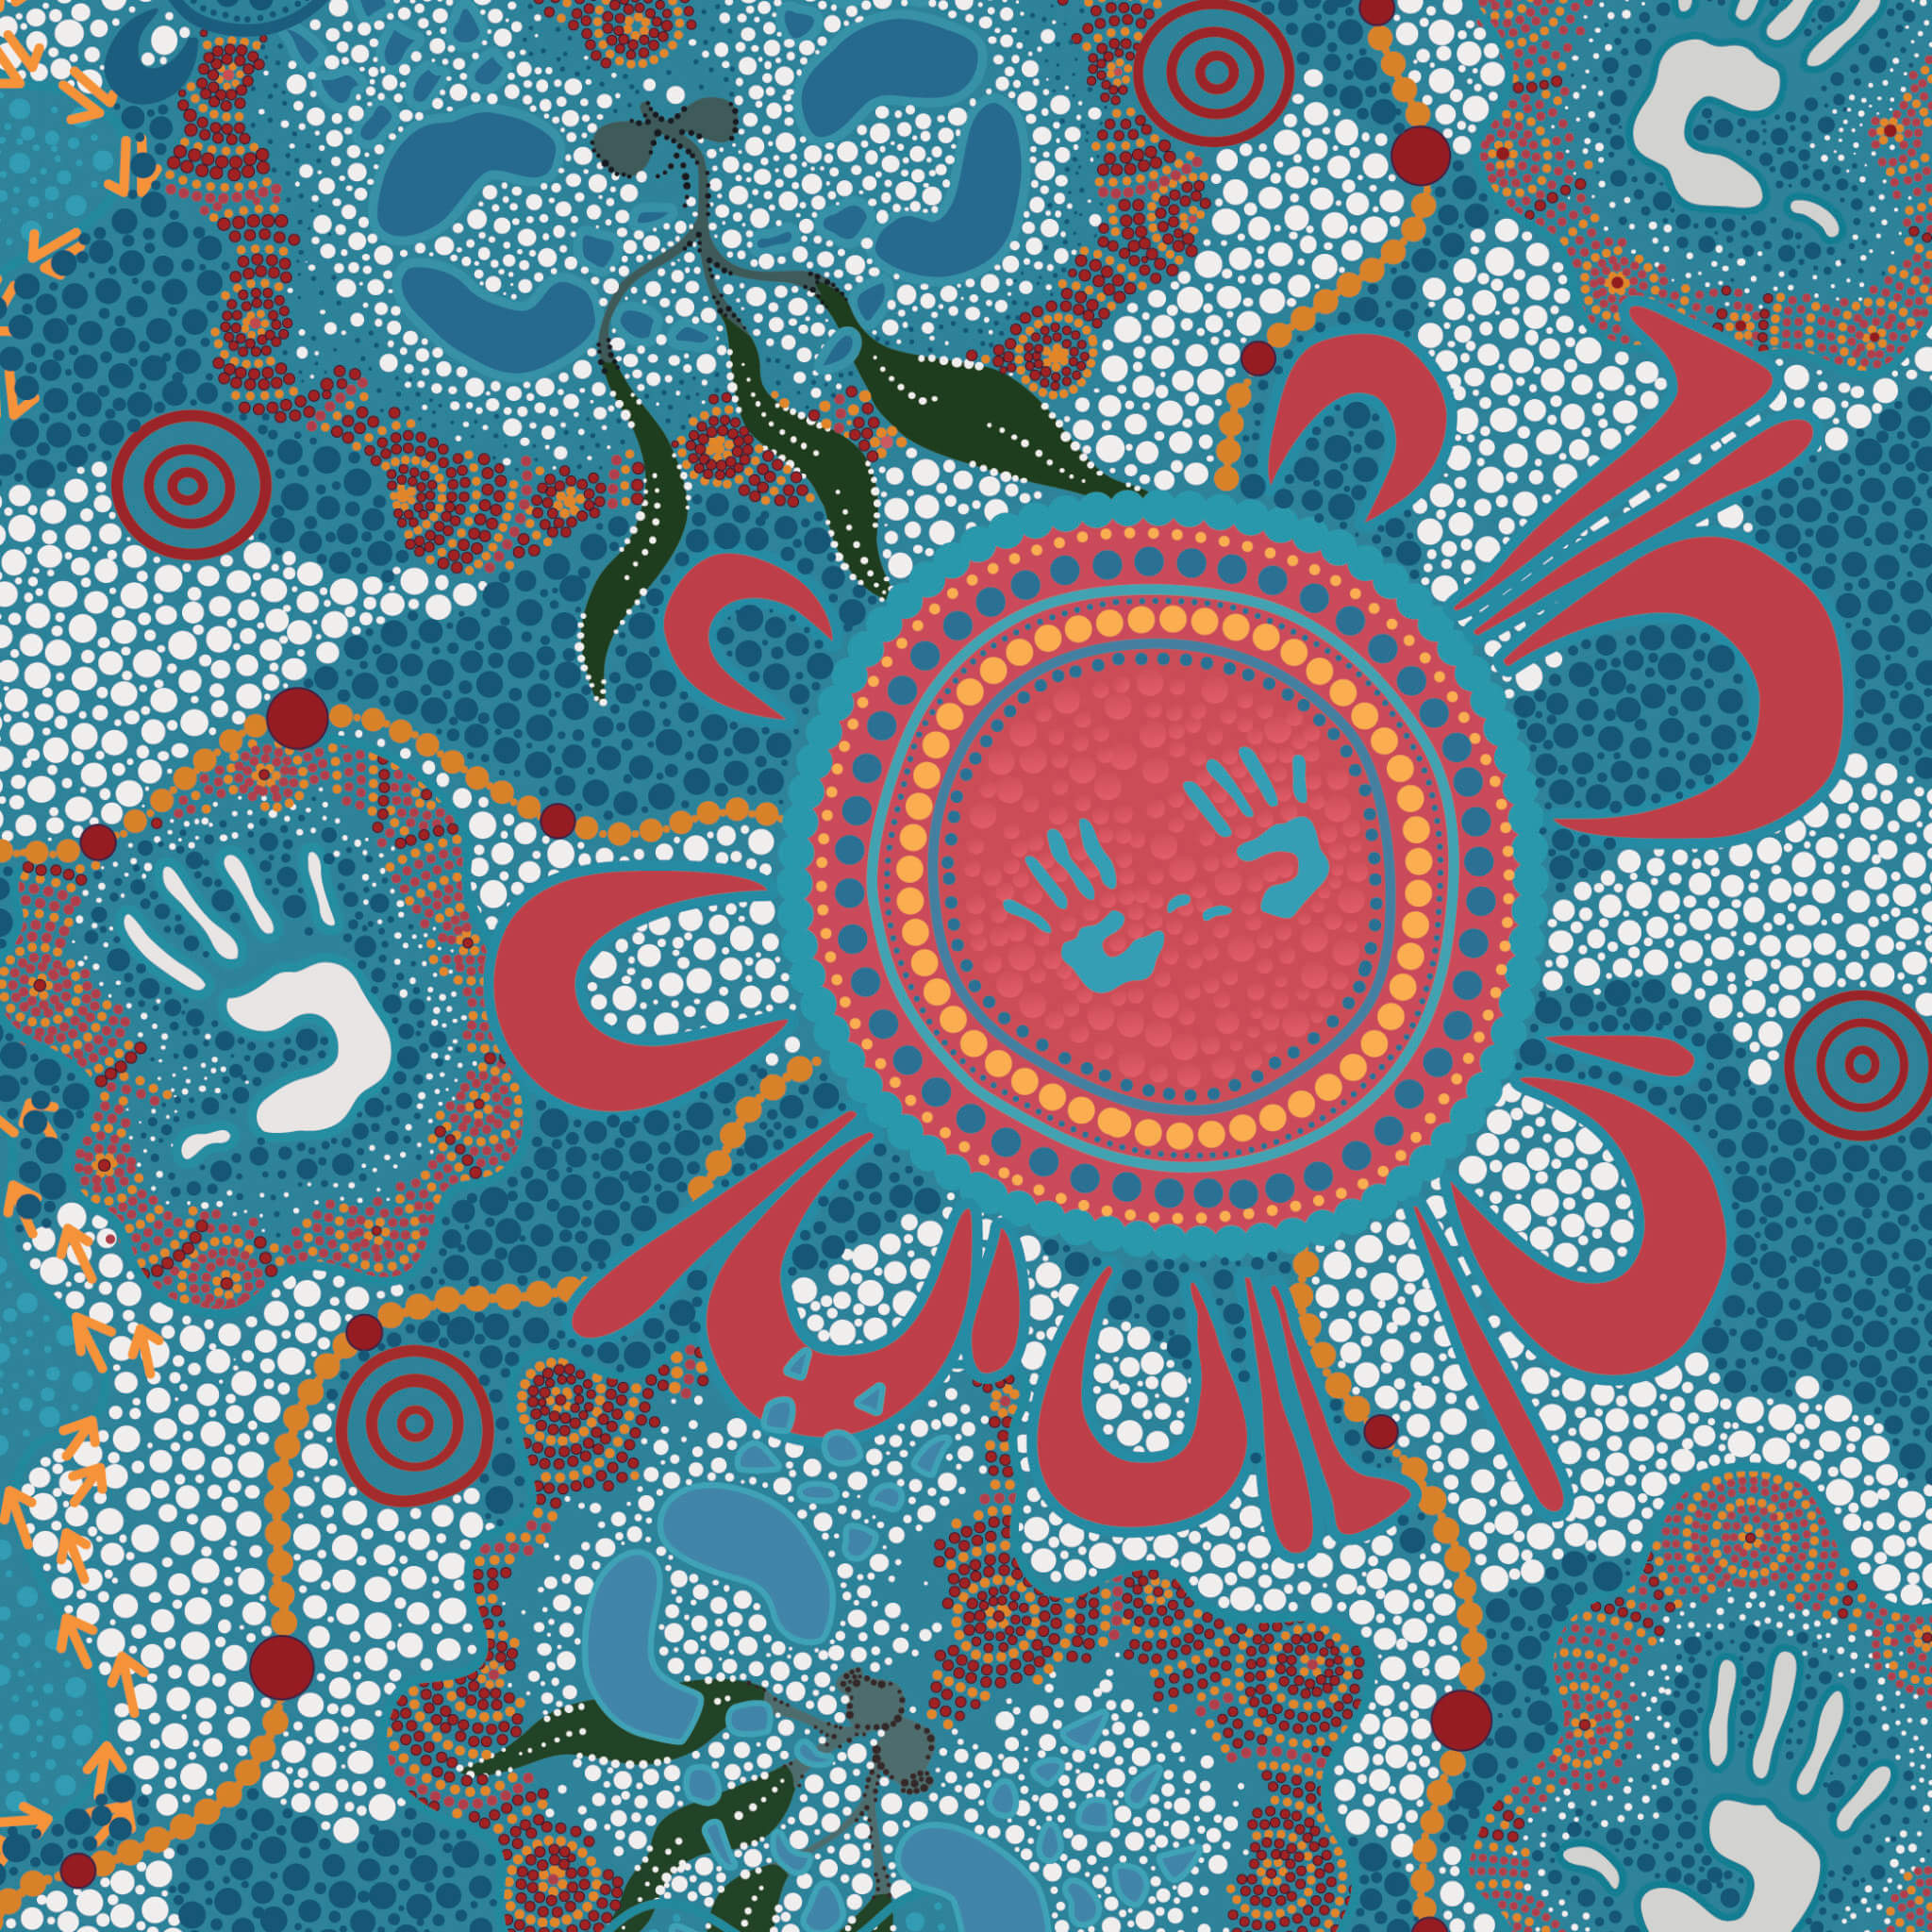 painting by Reconciliation Plan Artist Chloe Watego, featuring images of Indigenous cultural significance predominantly in colours of turquoise, red, orange and brown.